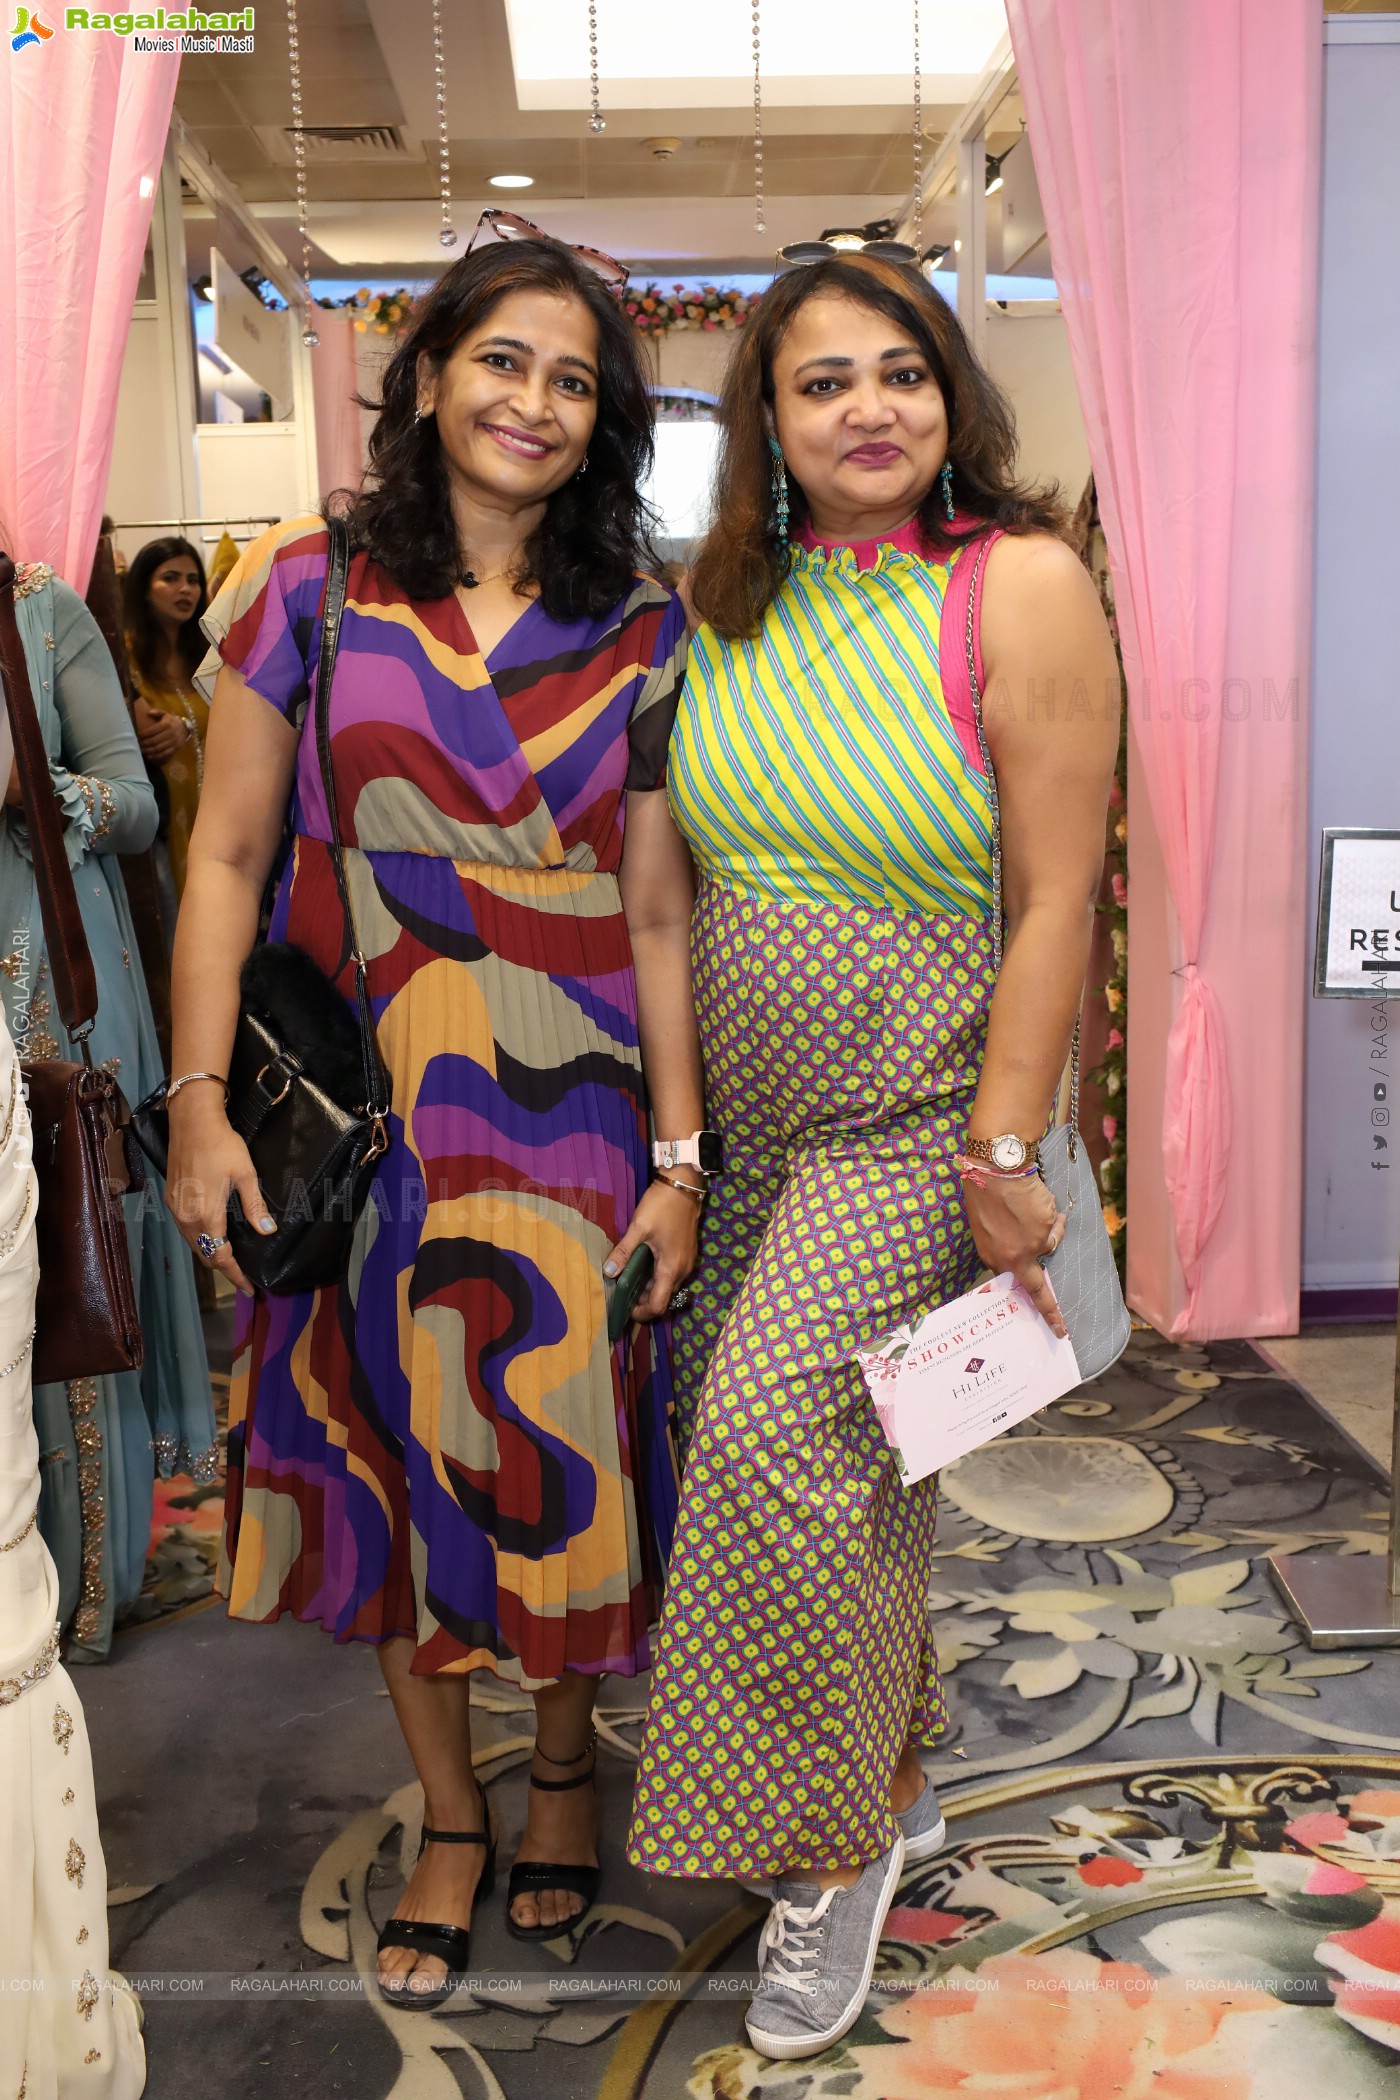 Grand Launch of Hi-Life Exhibition Spring Fashions Special Event, Hyderabad